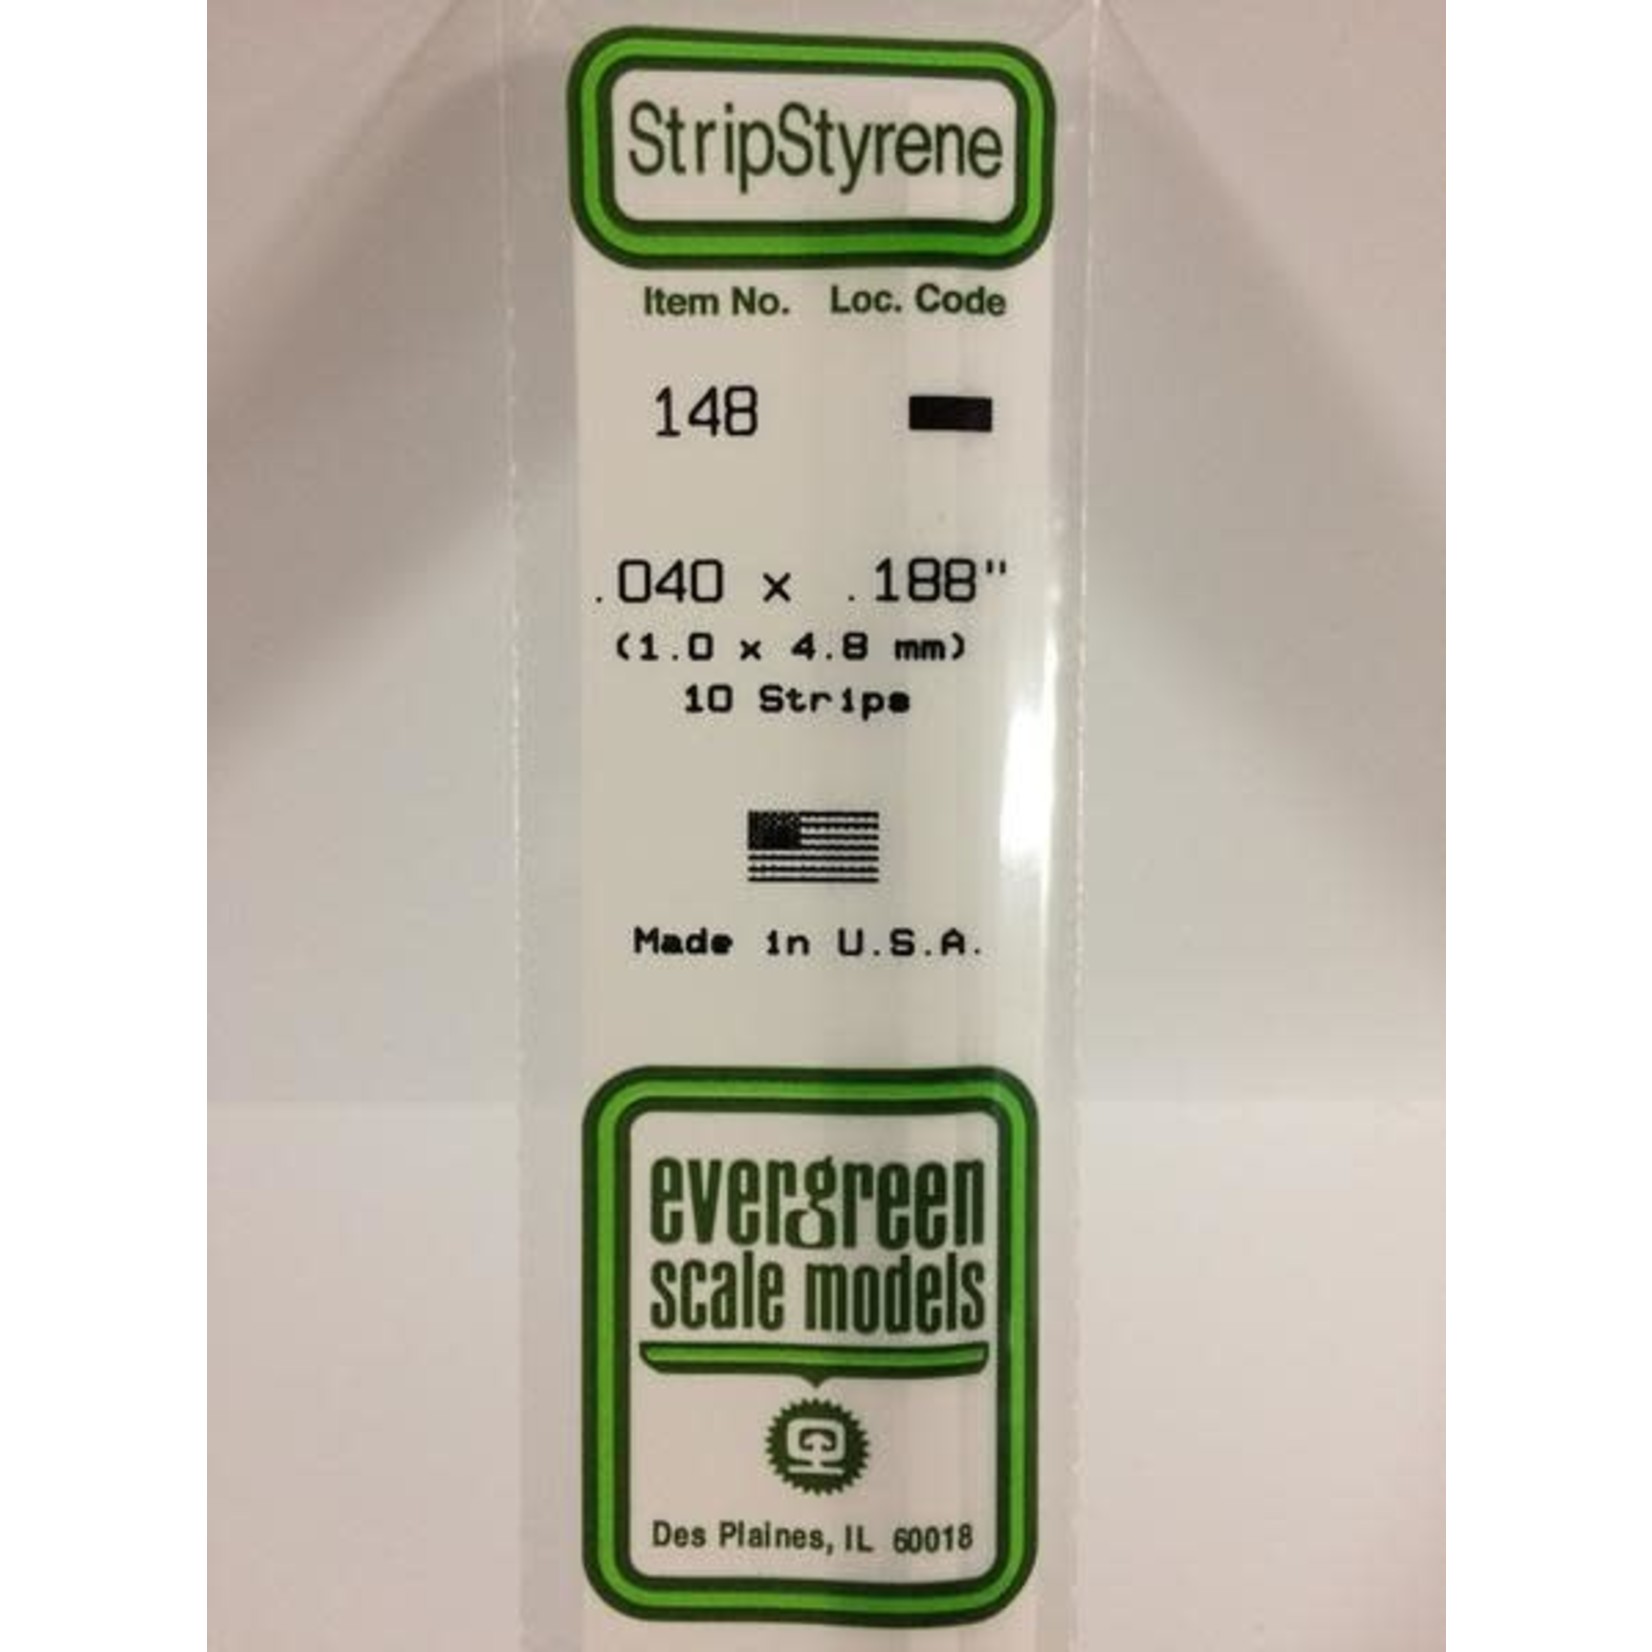 Evergreen Scale Models Evergreen 148 - .040" X .188" OPAQUE WHITE POLYSTYRENE STRIP